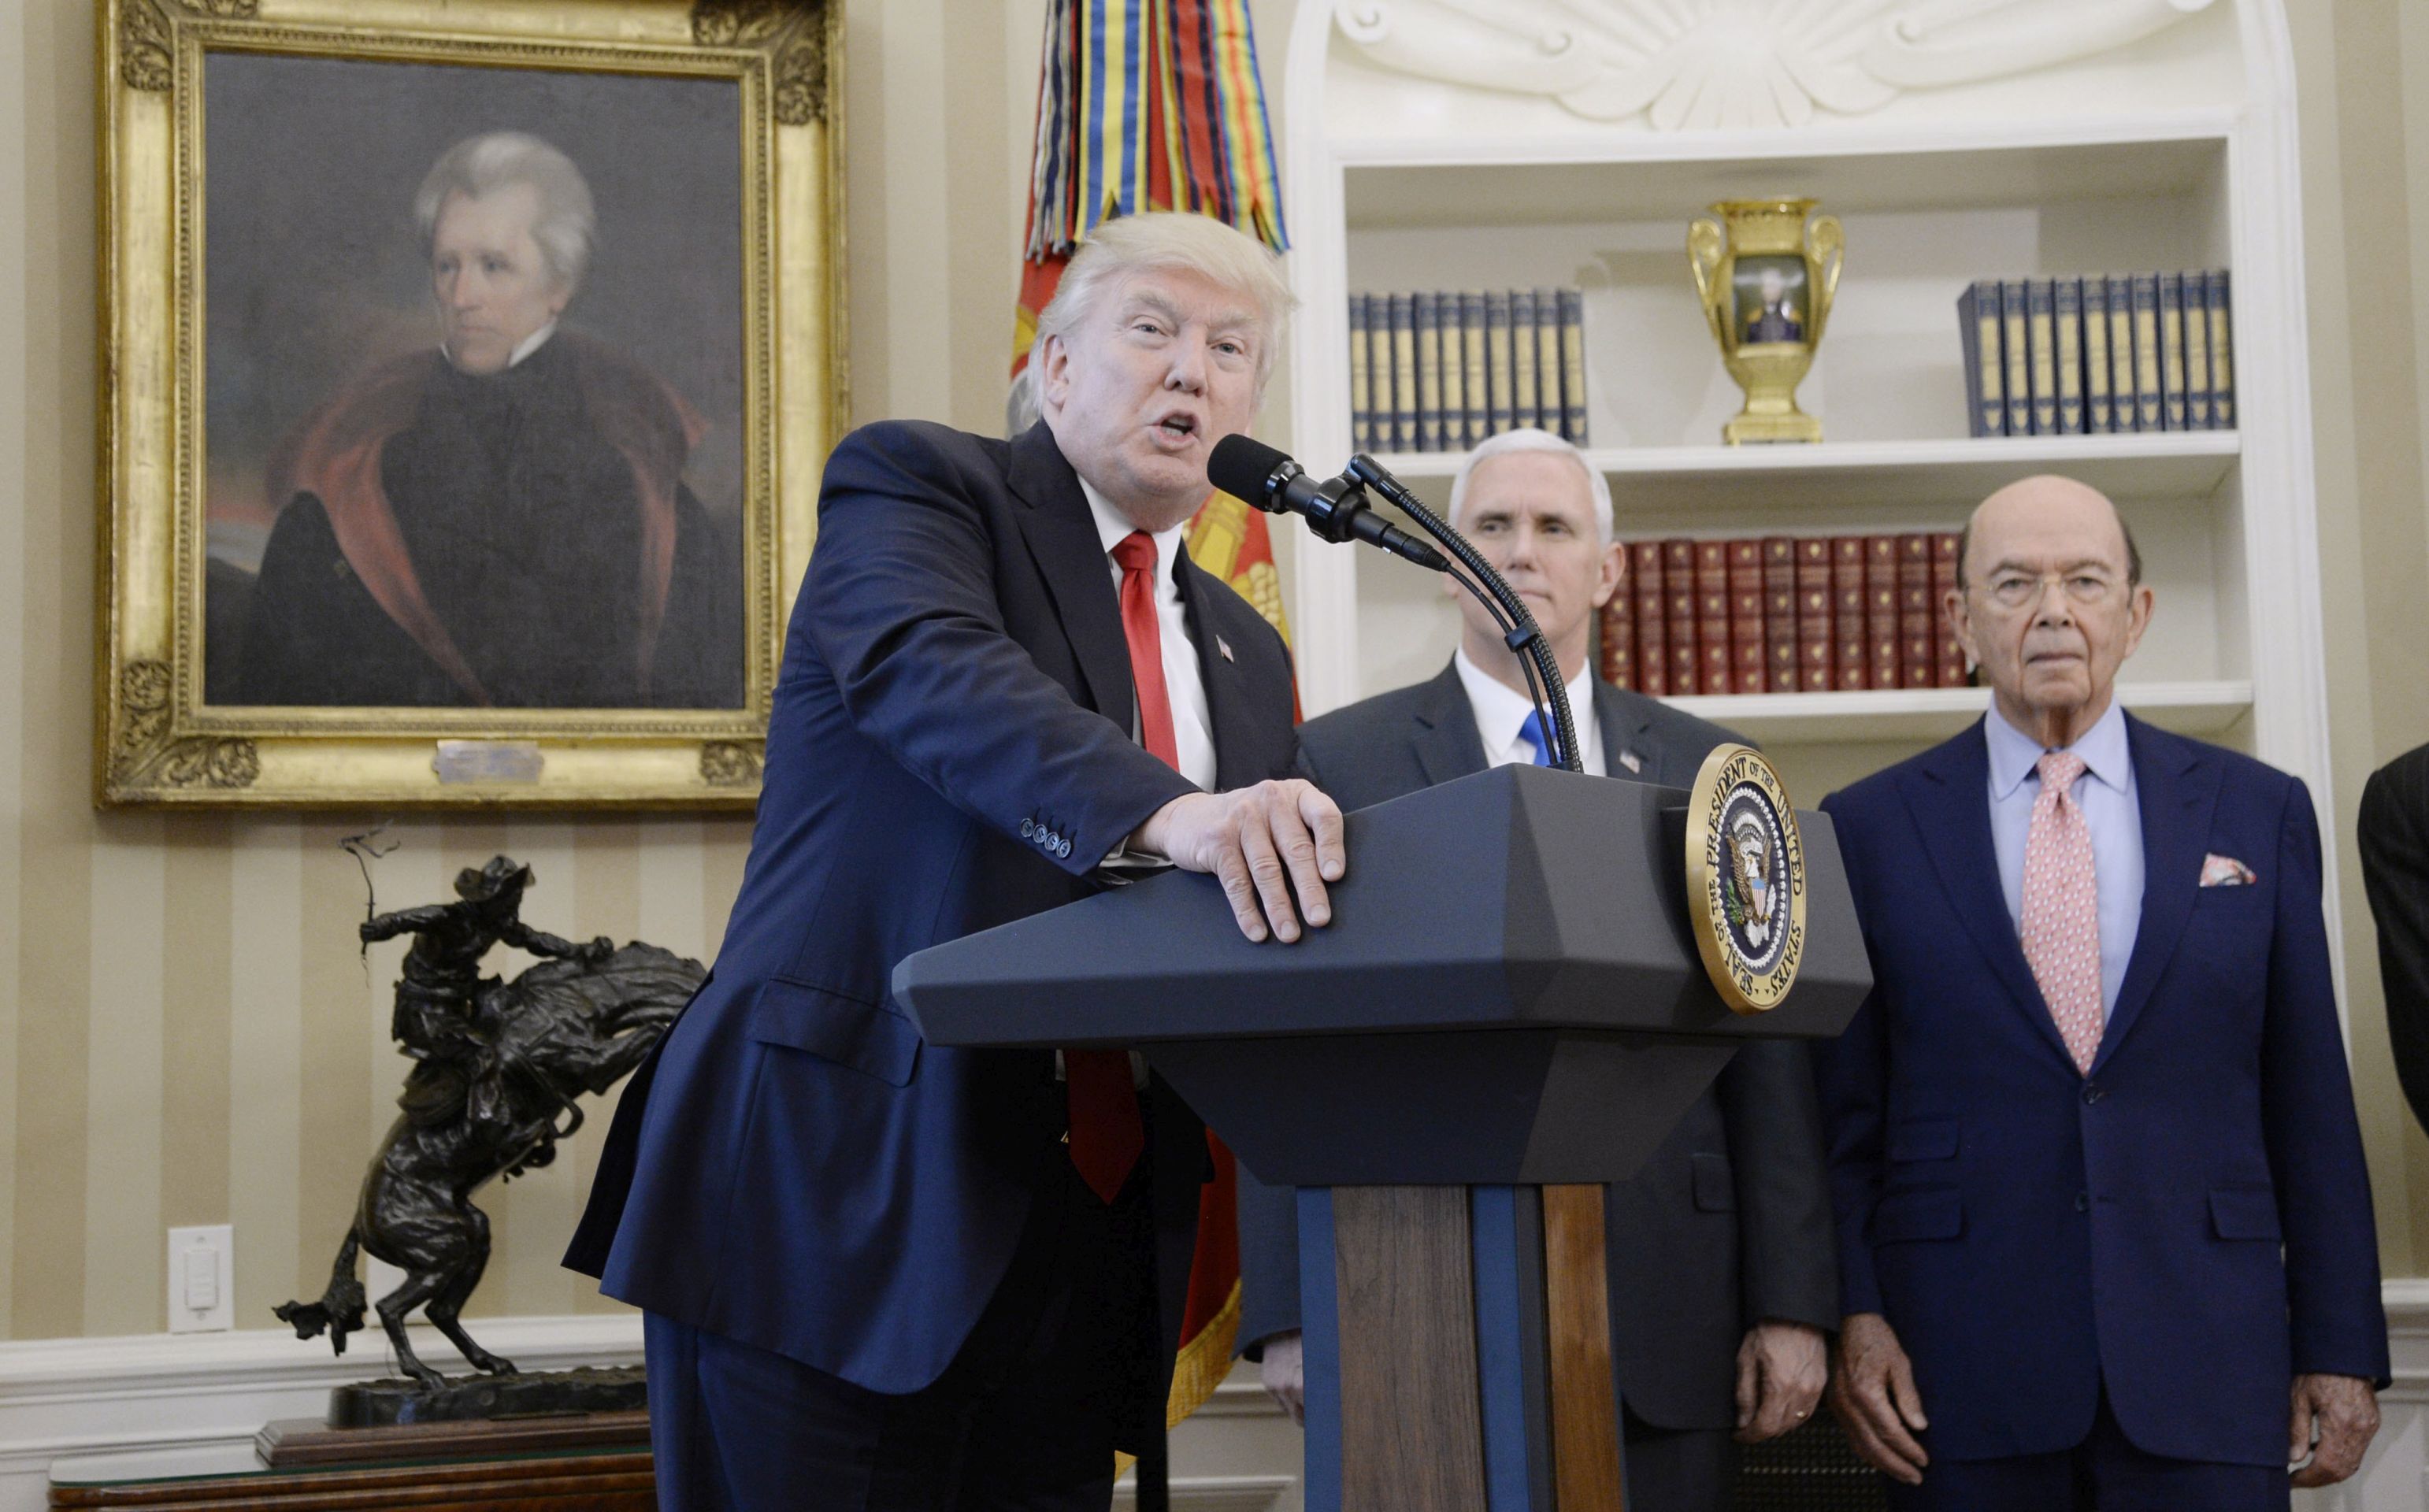 epa05881745 US President Donald J. Trump speaks about trade as Vice President Mike Pence and Secretary of Commerce Wilbur Ross look on before signing Executive Orders  in the Oval Office of the White House in Washington, DC, USA, 31 March 2017.  EPA/Olivier Douliery / POOL